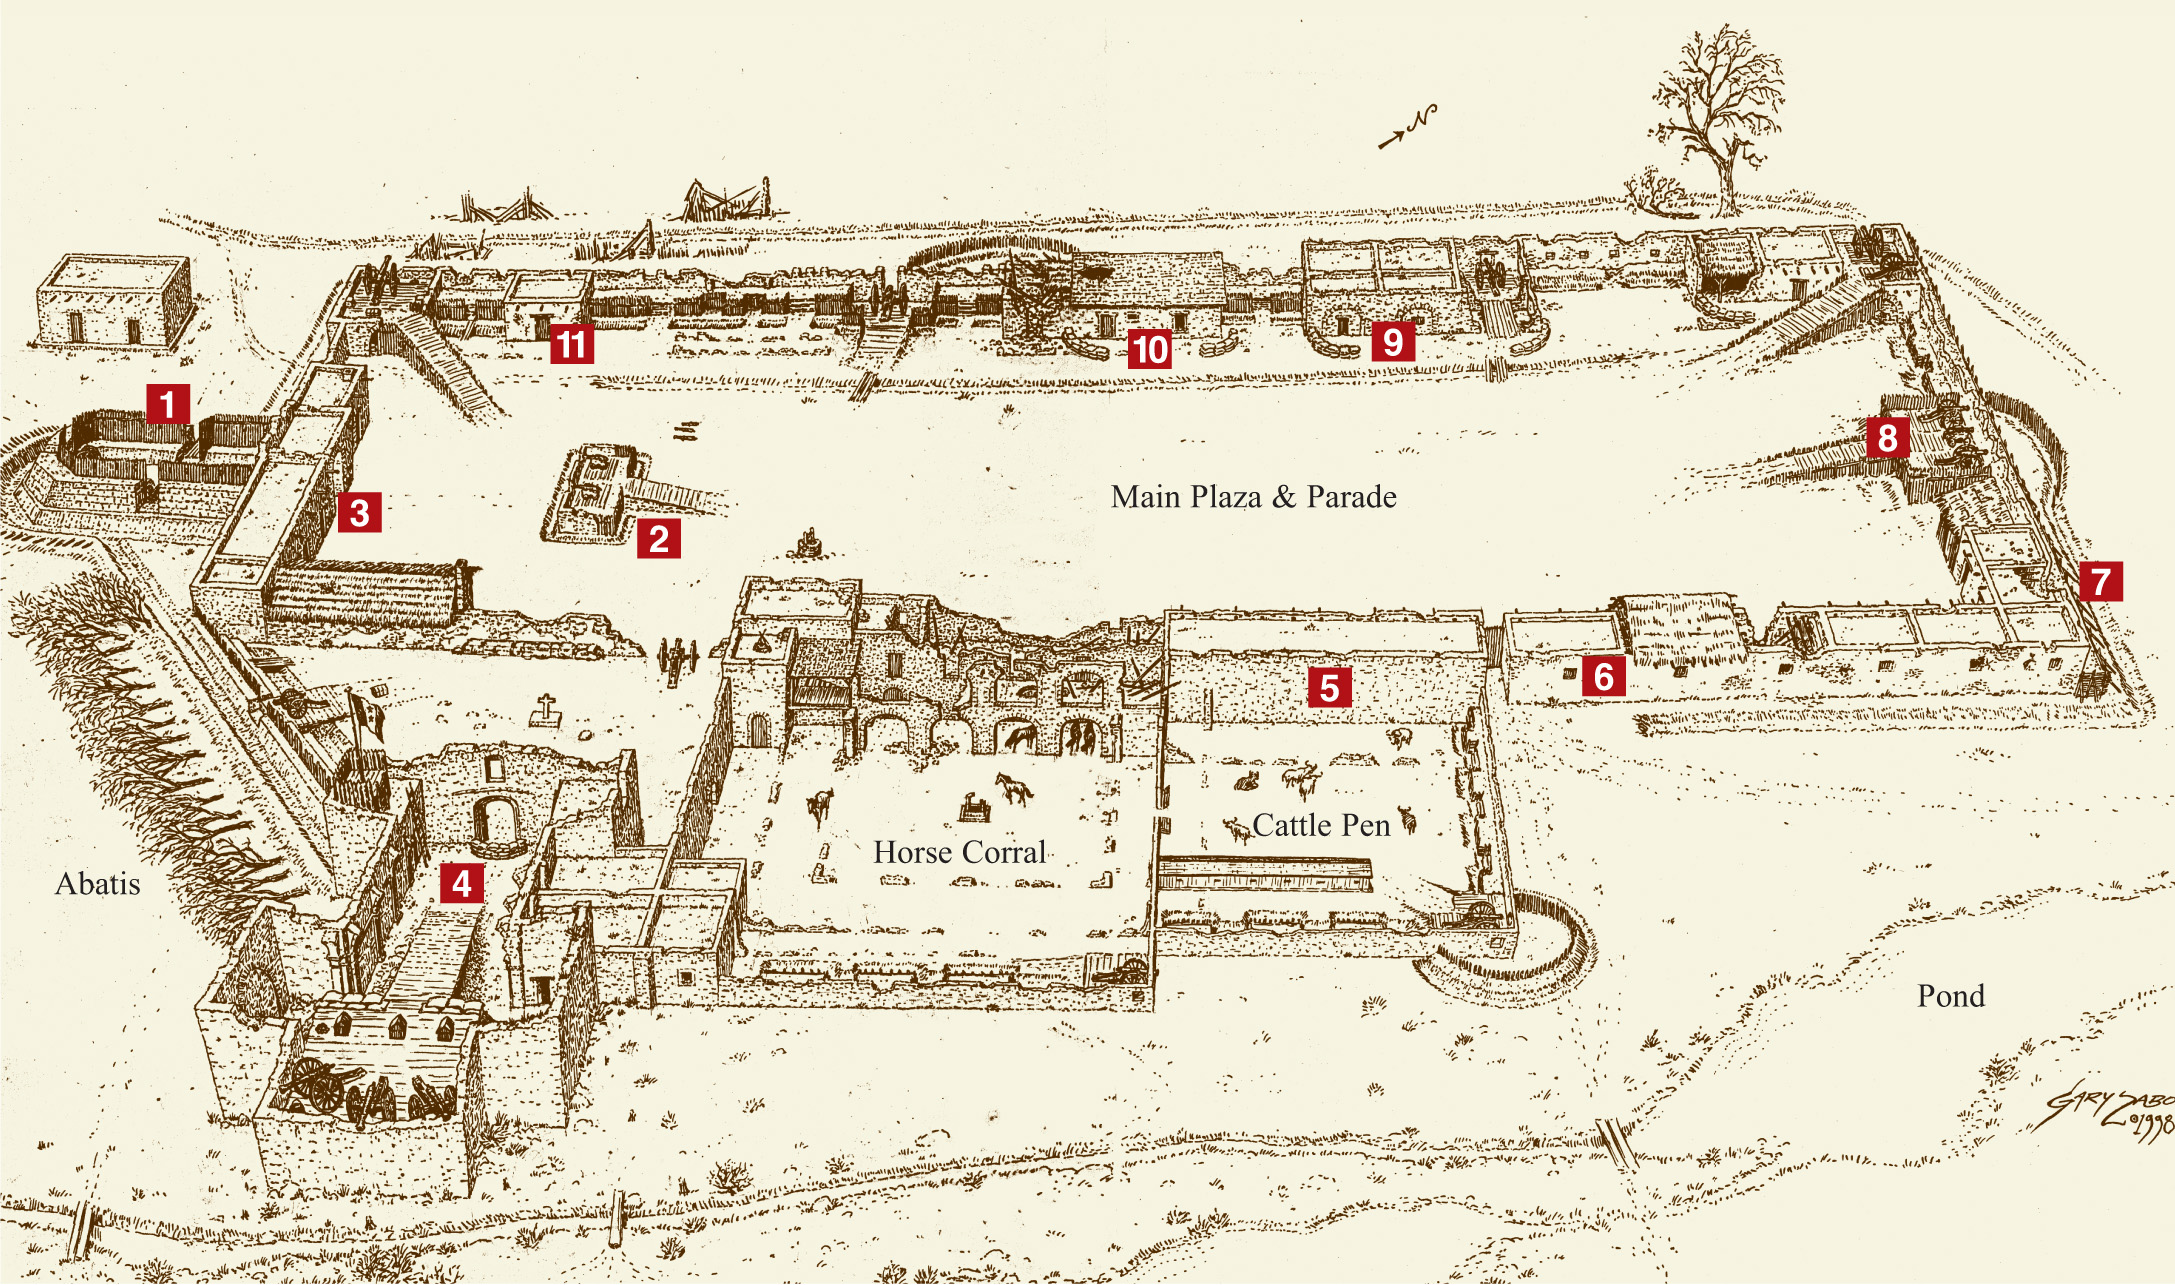 This plan of the Alamo fortification by historian and artist Gary Zaboly is based on recent research from a variety of sources. 1. Fortification of the main gate, probably pre-1835. 2. Interior gun platform covering the main gate. 3. Hospital where James  Bowie was killed. 4. Alamo chapel. 5. Soldiers barracks. 6. Artillery barracks. 7. Timber and earth outer work to reinforce entire length of the north wall. 8. Three-gun battery where Travis was killed. 9. Officers barracks. 10. Headquarters. 11. Artillery command post and armory.